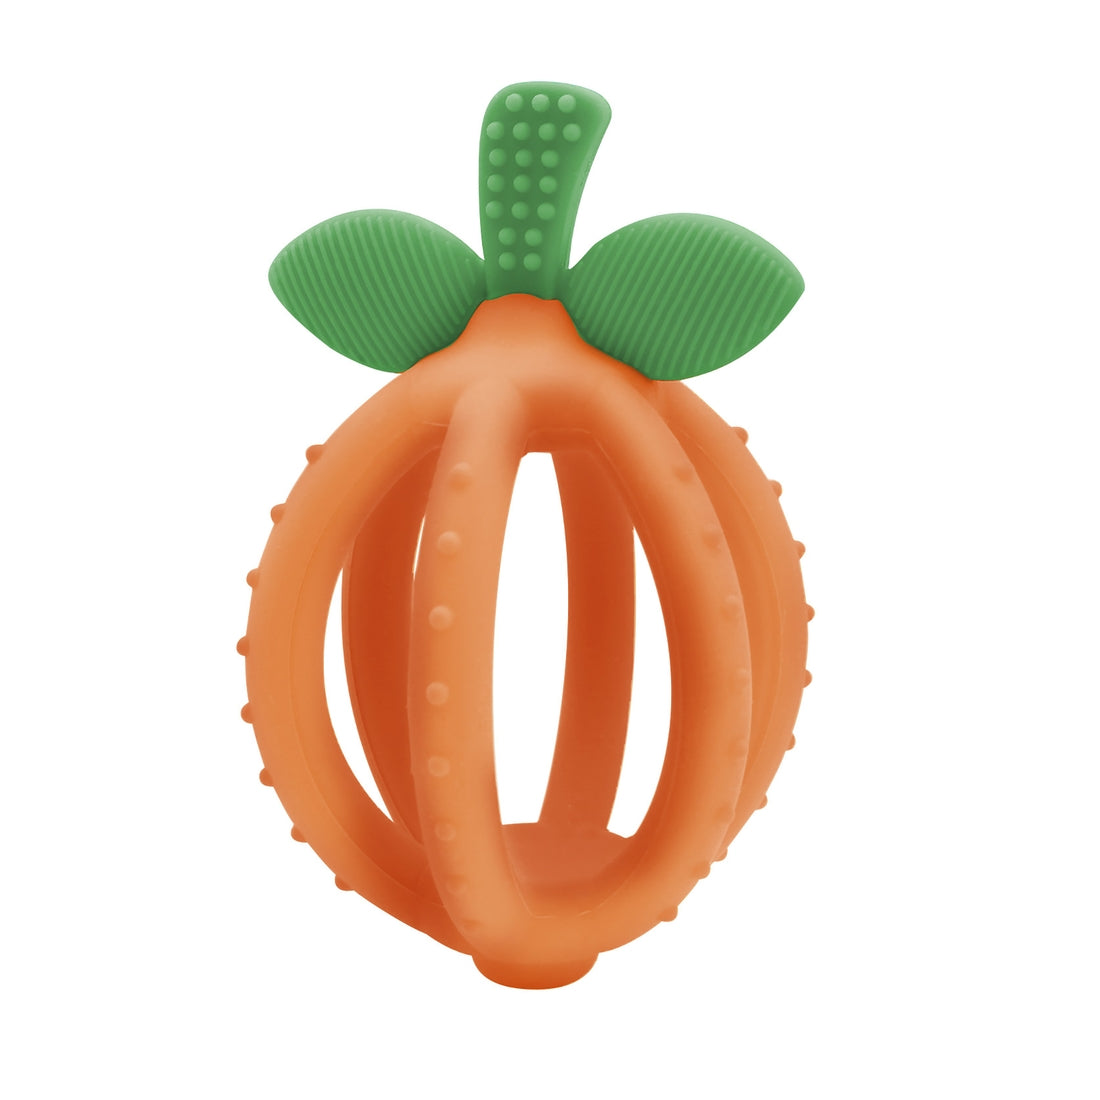 Itzy Ritzy Bitsy Biter - Peach Theme - Sore gums are no match for the Itzy Ritzy Bitzy Biter™ Teething Ball! This multi-texture teether is perfect for providing comfort as it soothes your child's emerging teeth and calms sore, swollen gums. It also acts as a training toothbrush on the stem. The teething ball is shaped like a lemon/clementine and is made of non-toxic food grade silicone. The open design makes it perfect for small hands to hold.